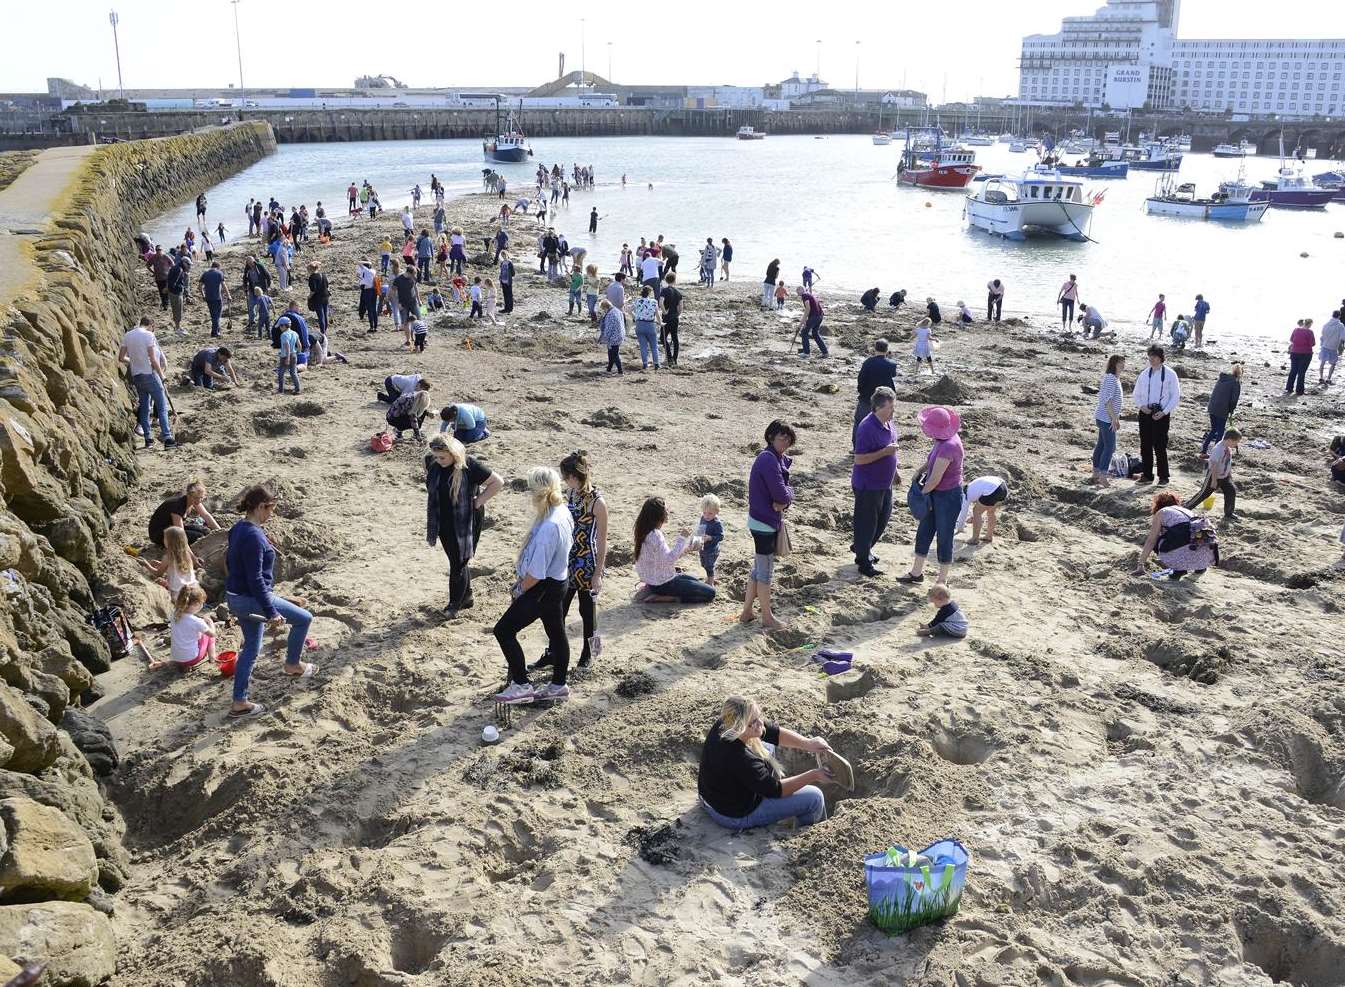 People digging for gold on the beach when the project was announced. Picture: Paul Amos